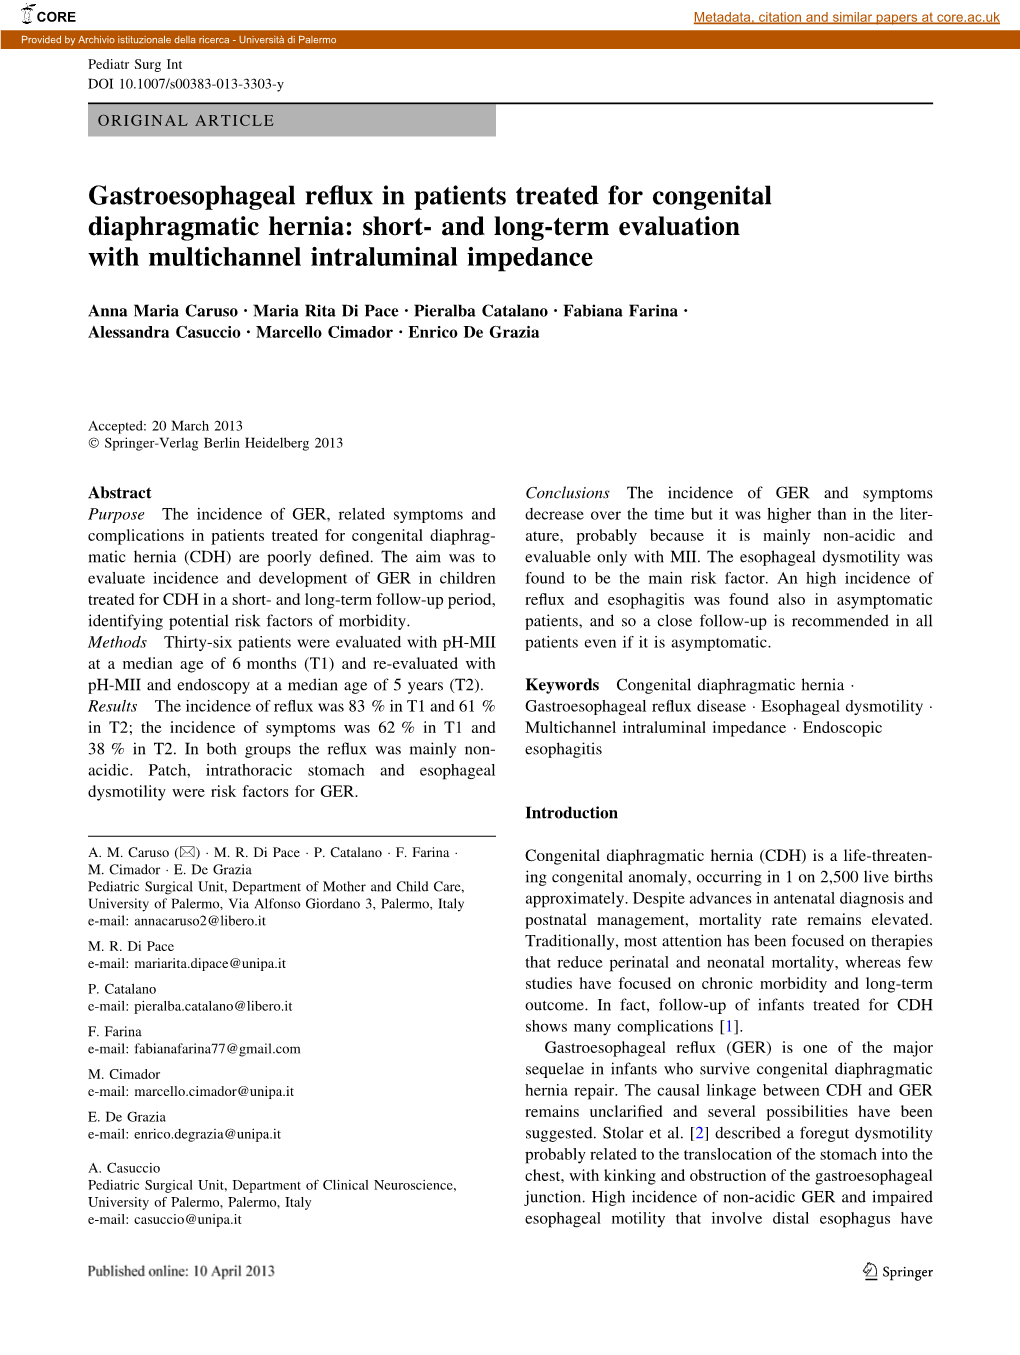 Gastroesophageal Reflux in Patients Treated for Congenital